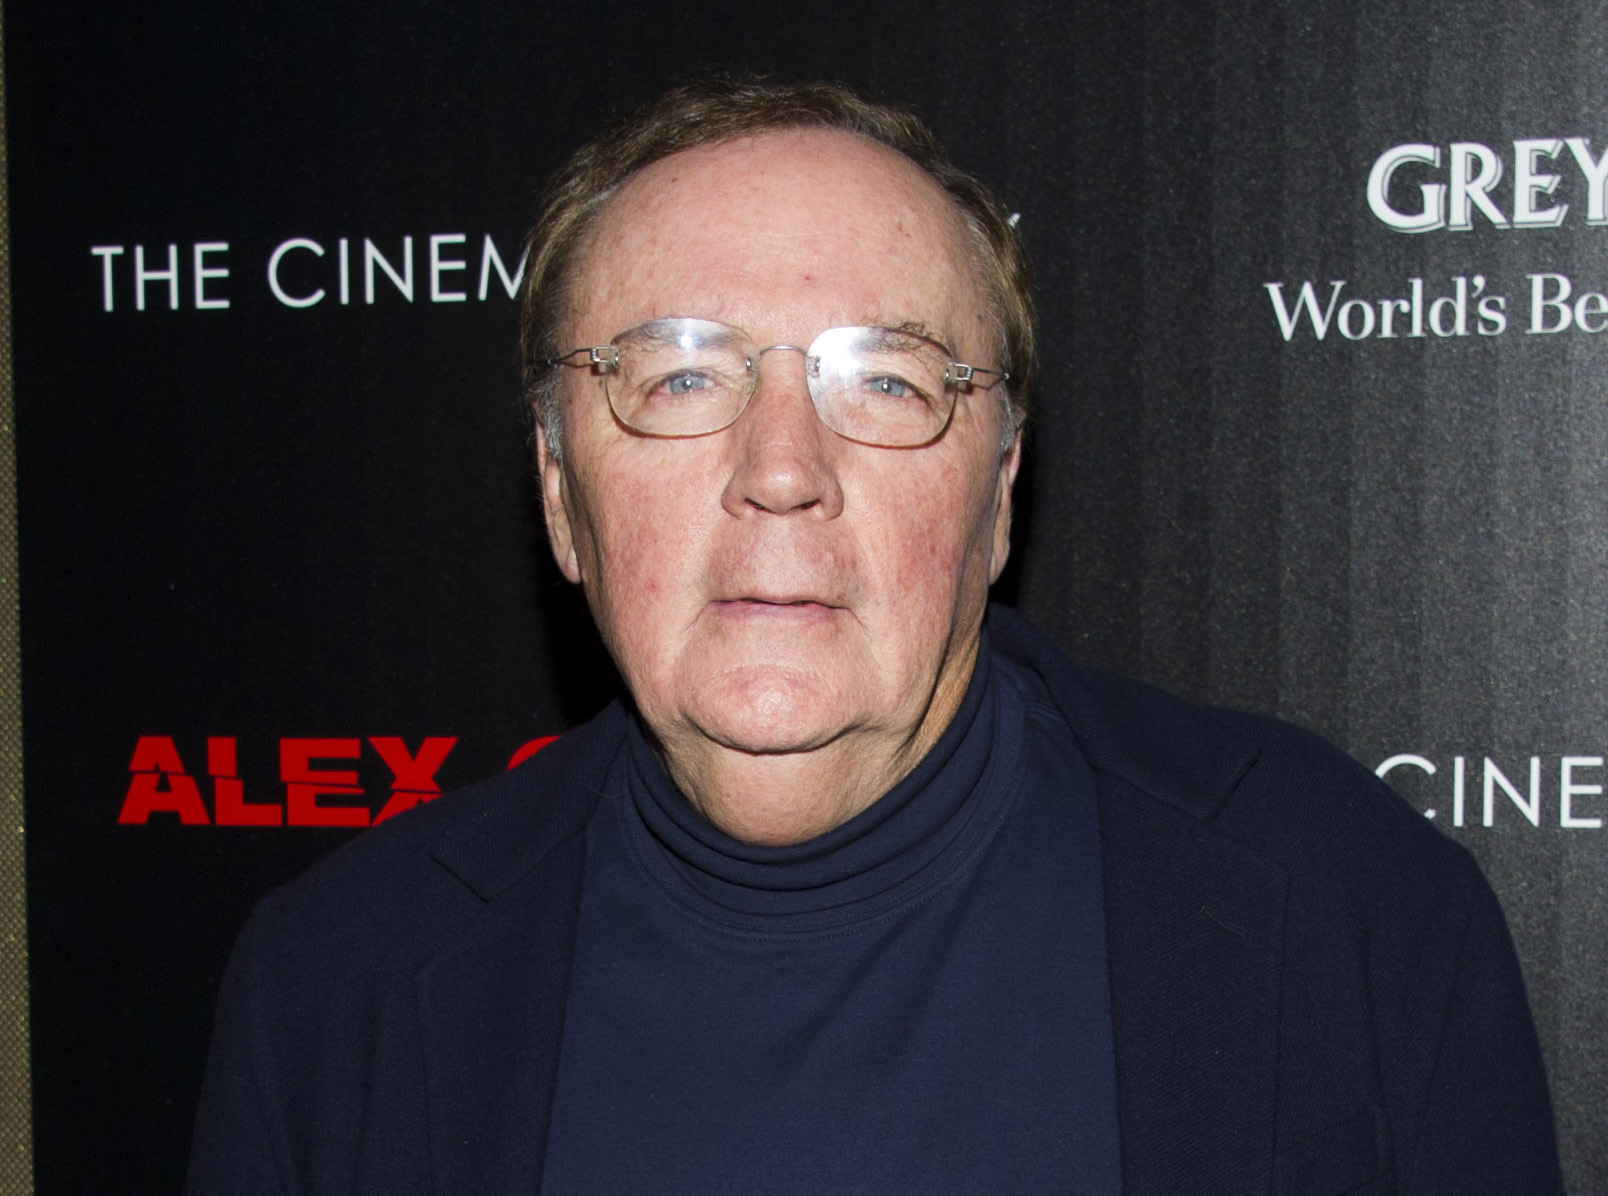 James Patterson to receive honorary National Book Award – Houston Chronicle